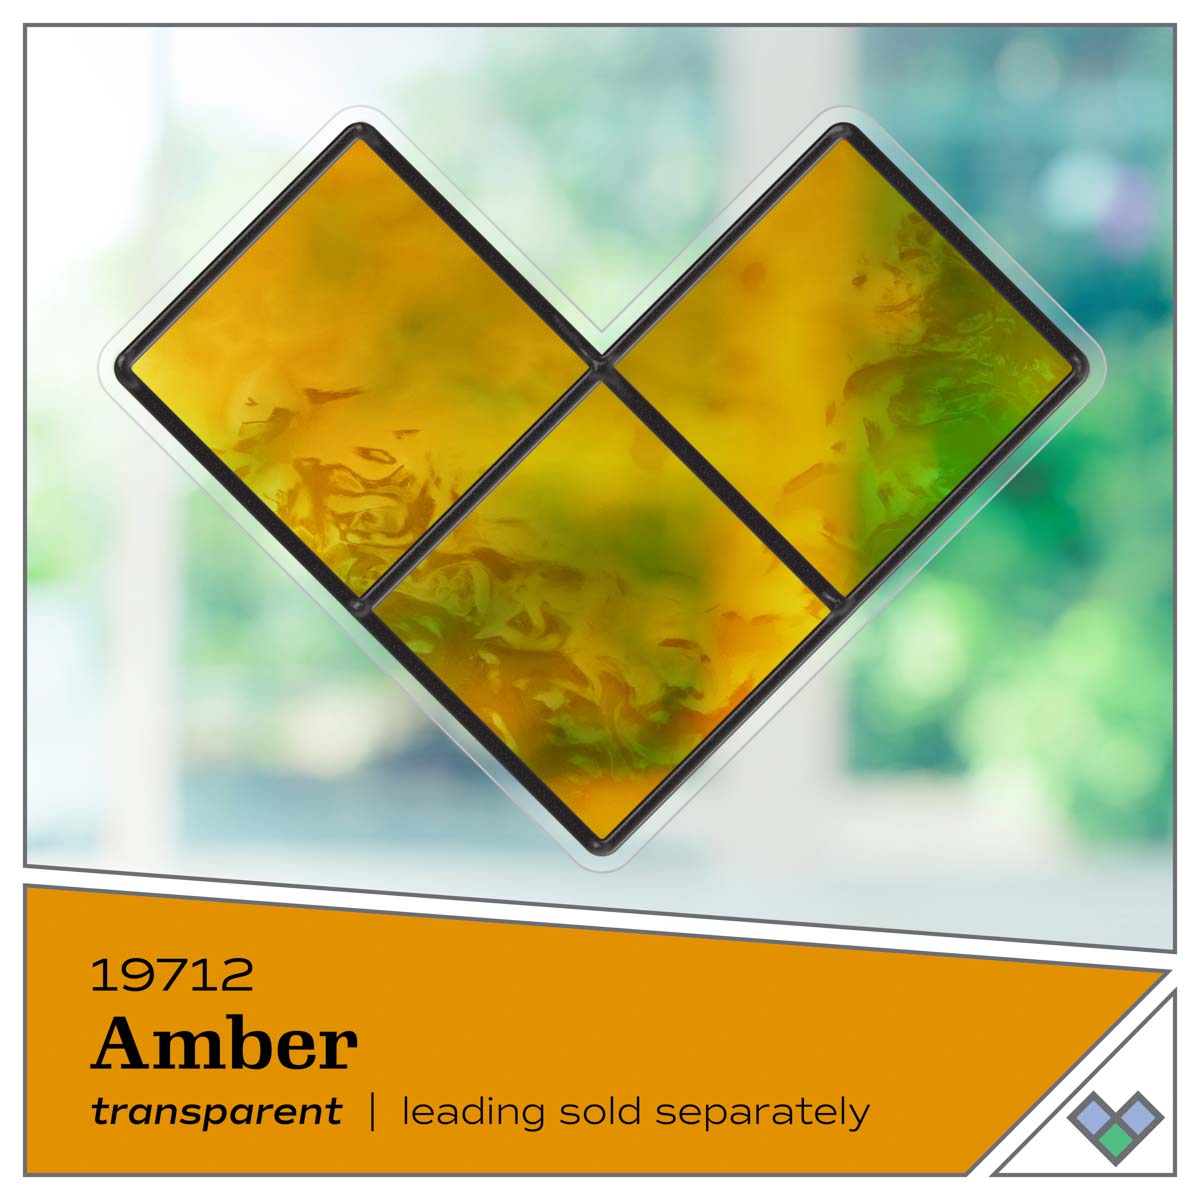 Gallery Glass ® Stained Glass Effect Paint - Amber, 2 oz. - 19712